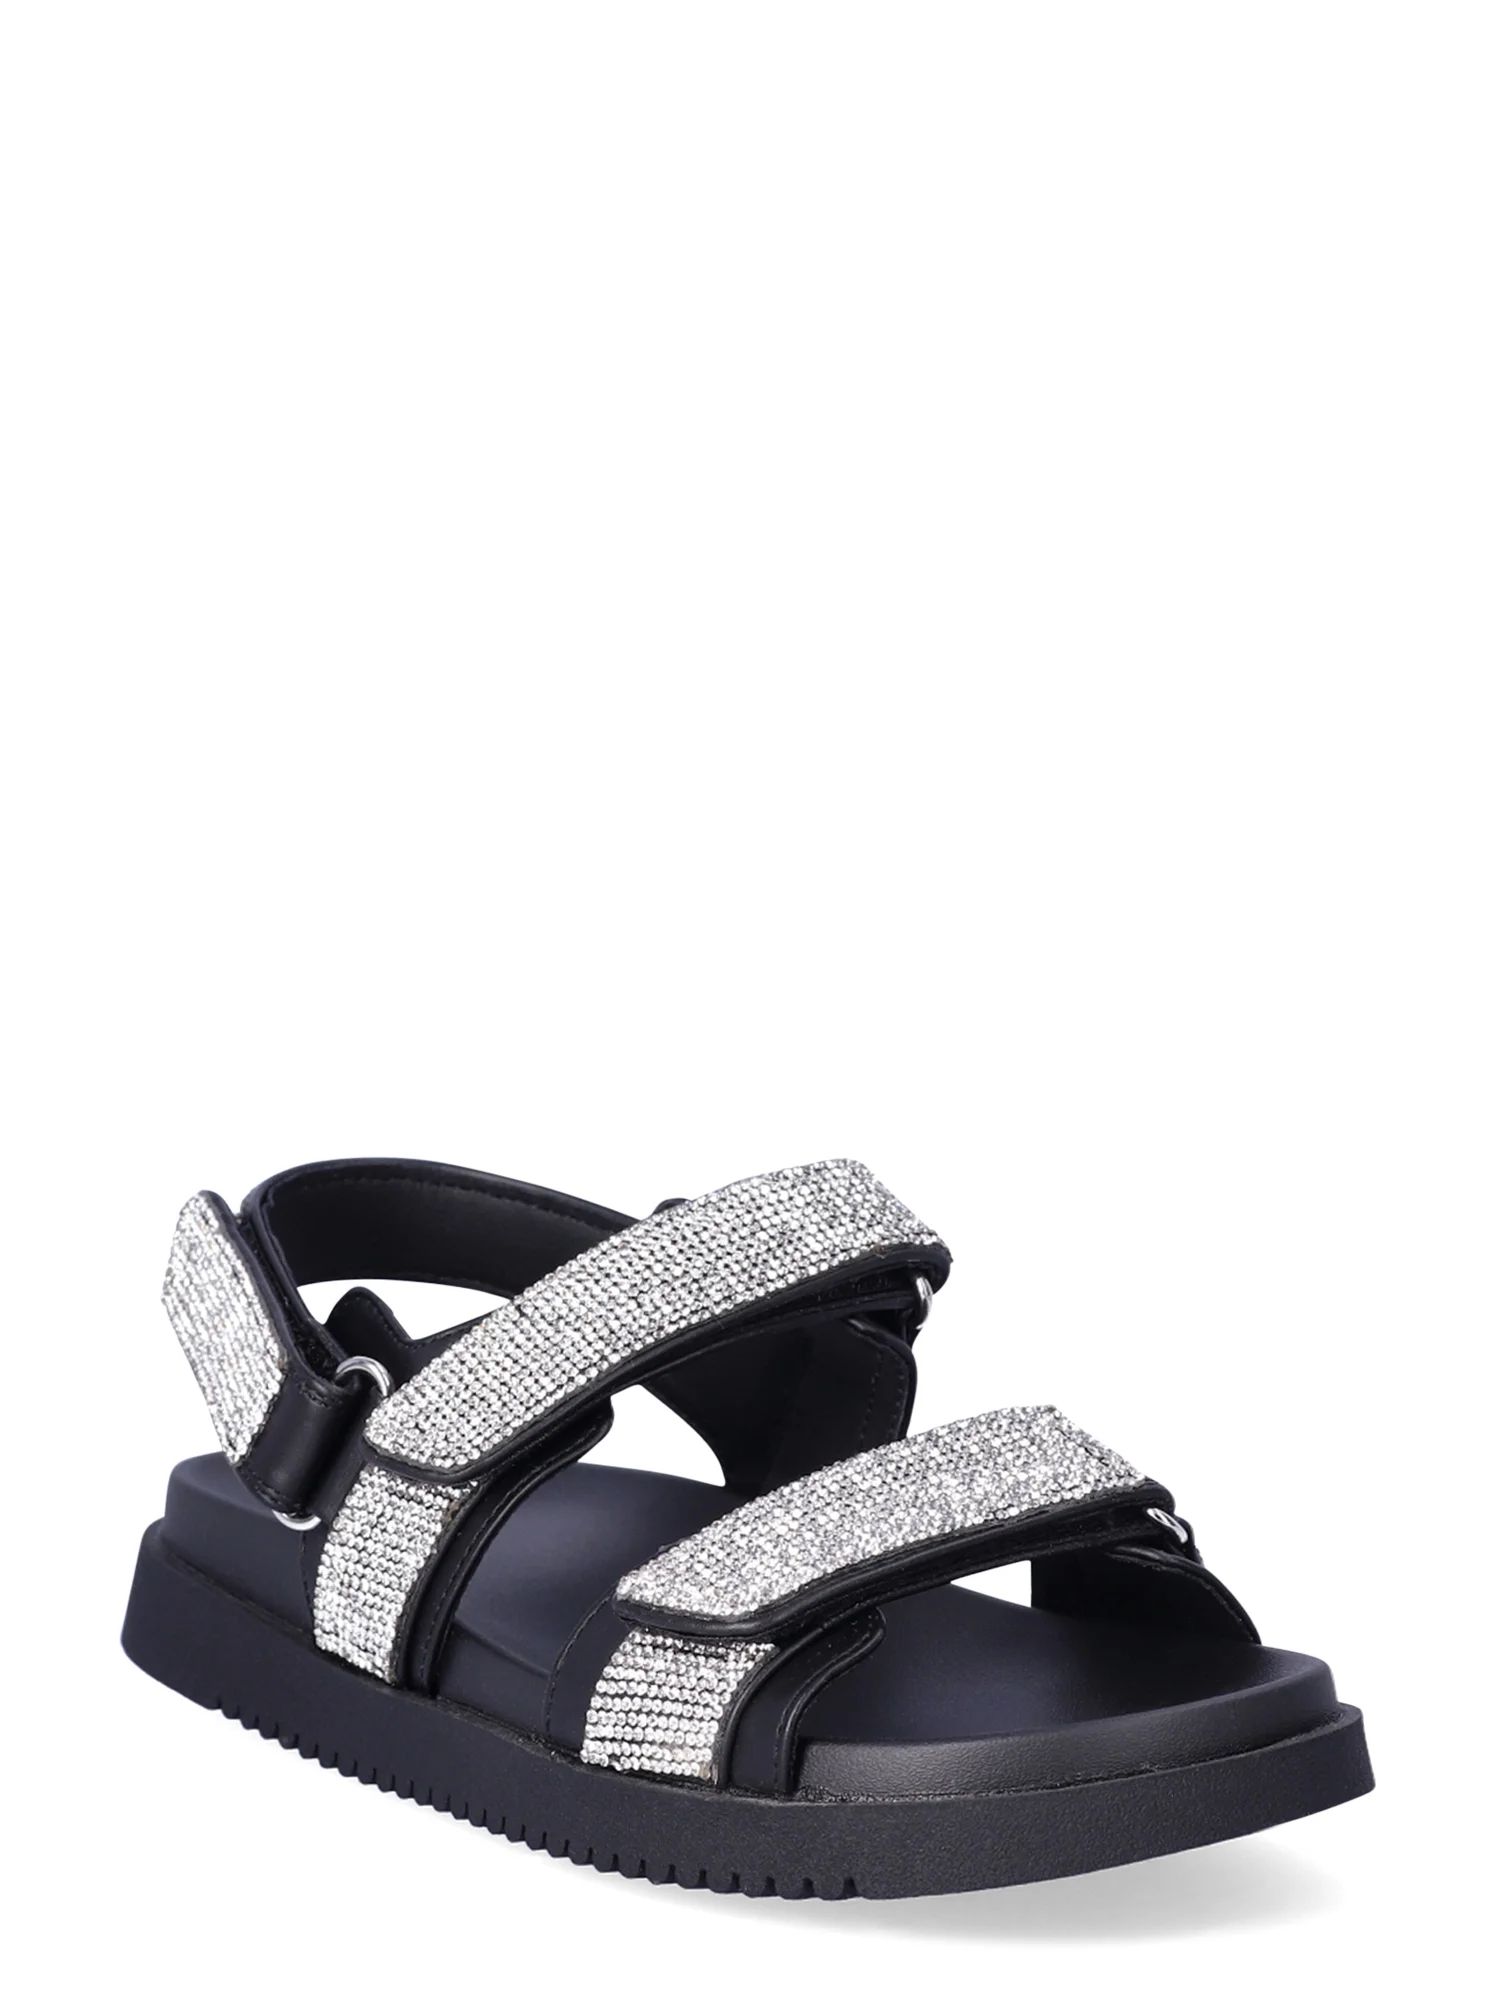 Madden NYC Women's Bling Two Band Sandals | Walmart (US)